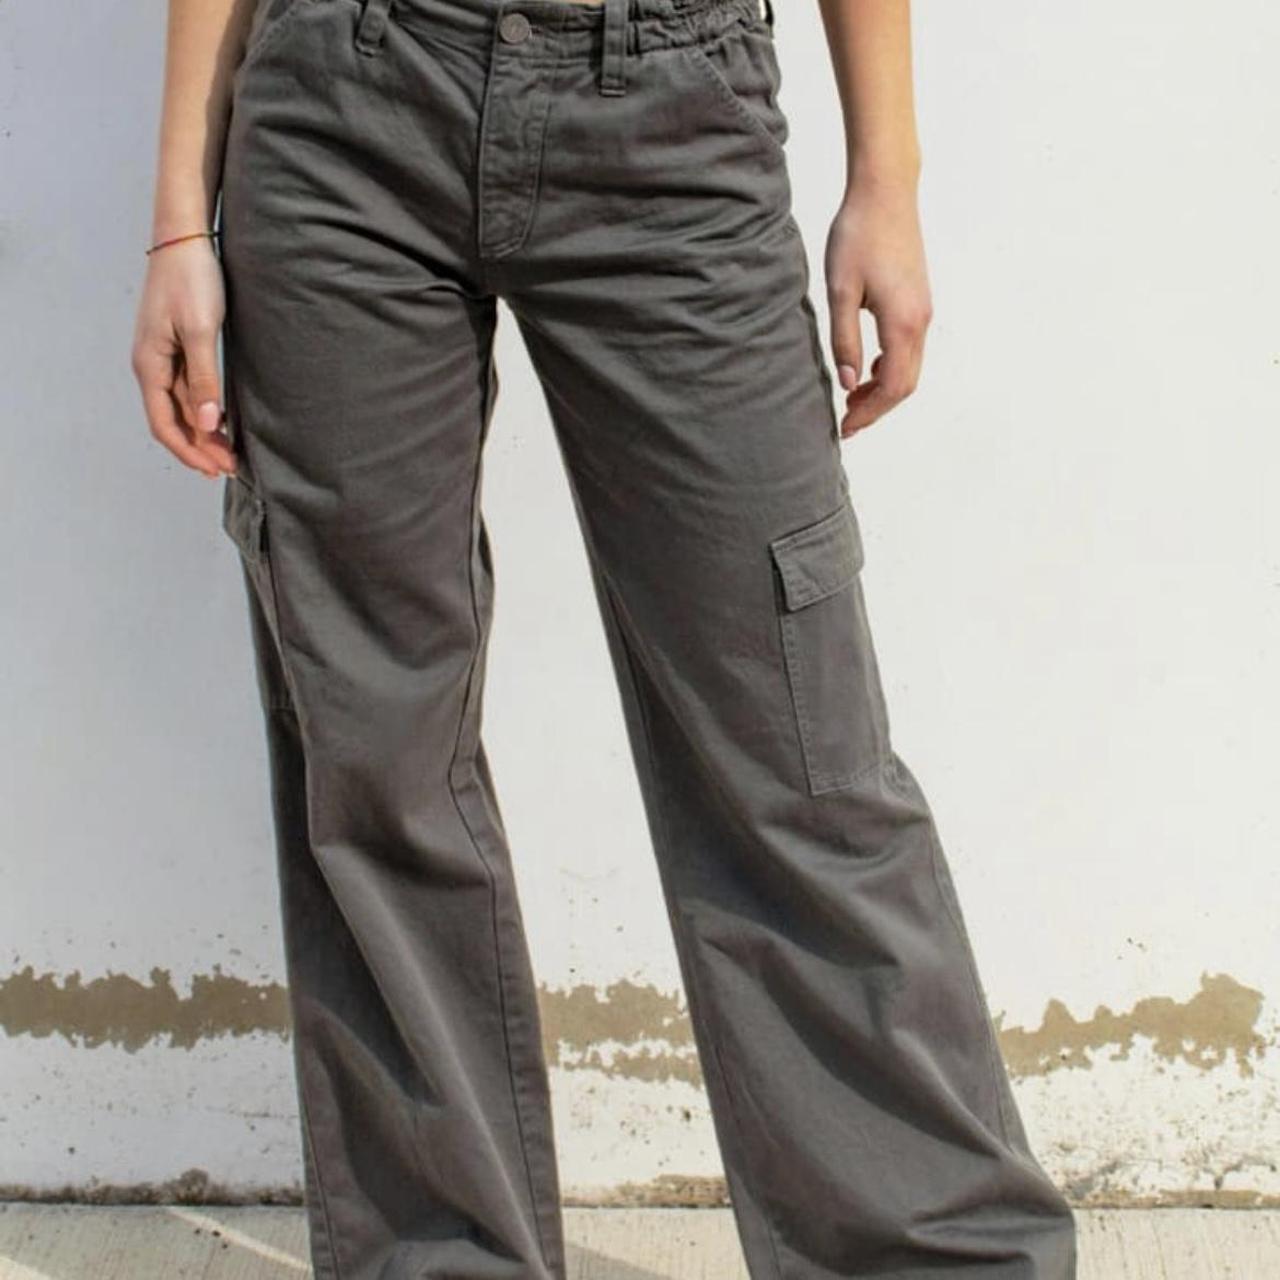 Subdued cargo trousers brand new never worn, Bought